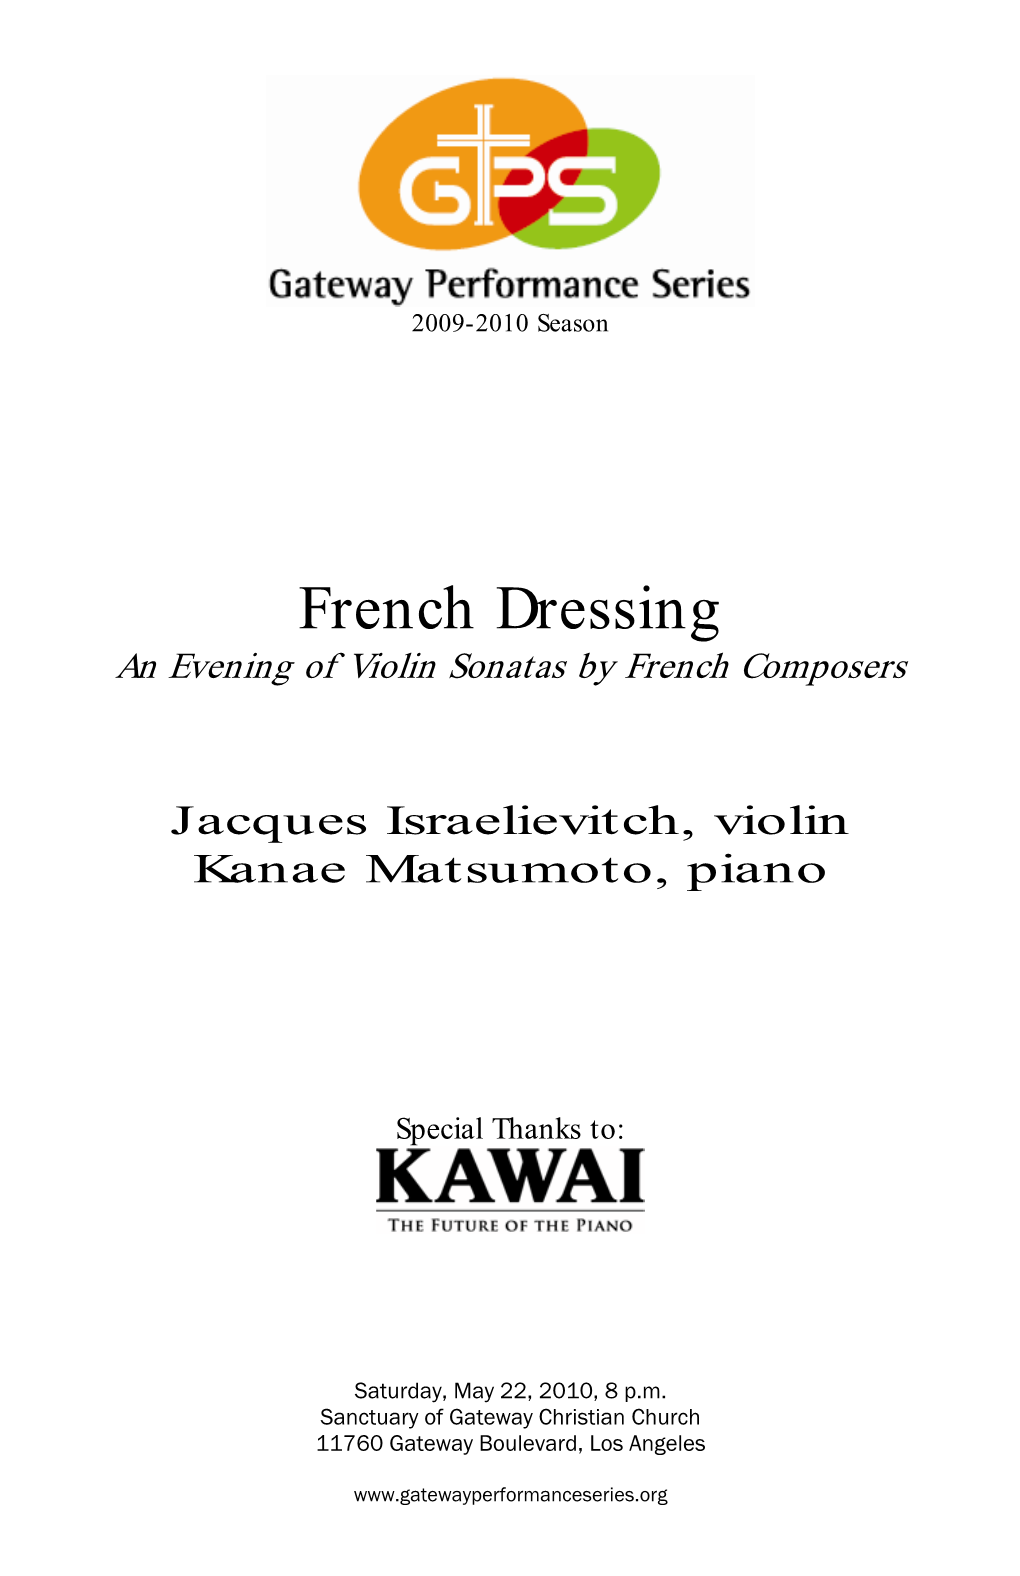 French Dressing an Evening of Violin Sonatas by French Composers